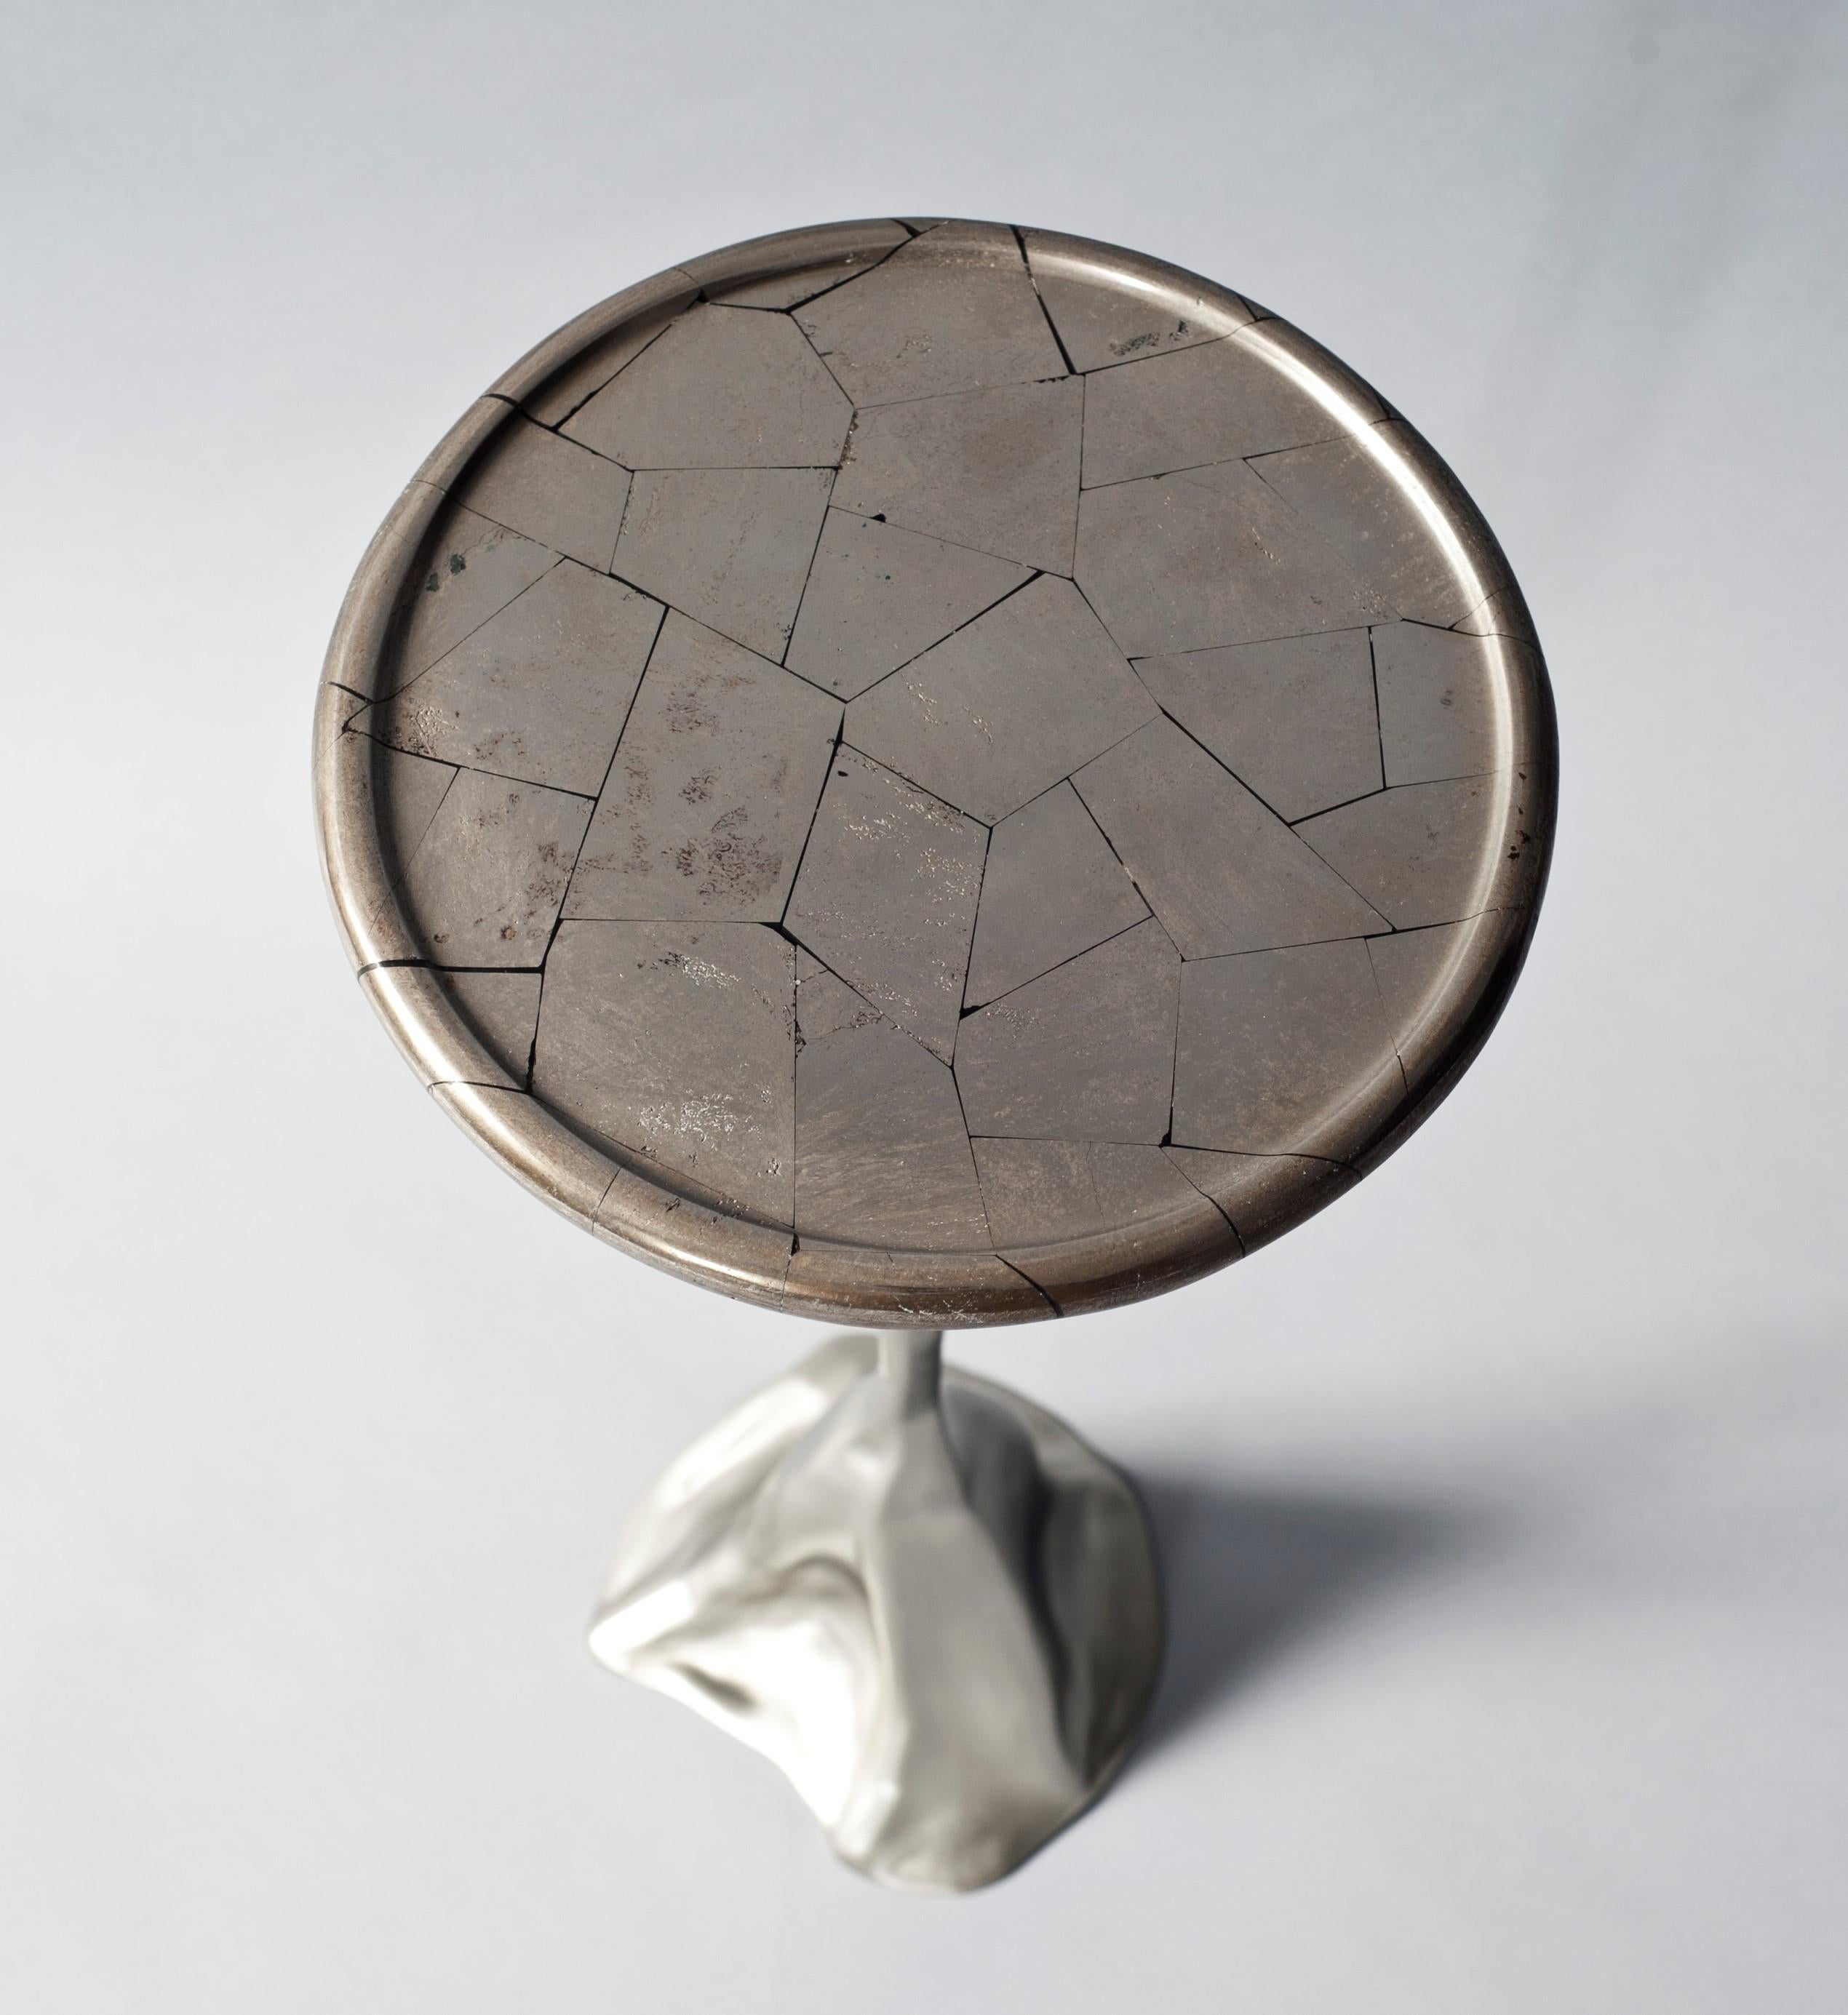 The Tana side or drinks table by DeMuro Das has a circular tray top in silver pyrite supported by a sculptural, hand-cast solid nickel silver base.